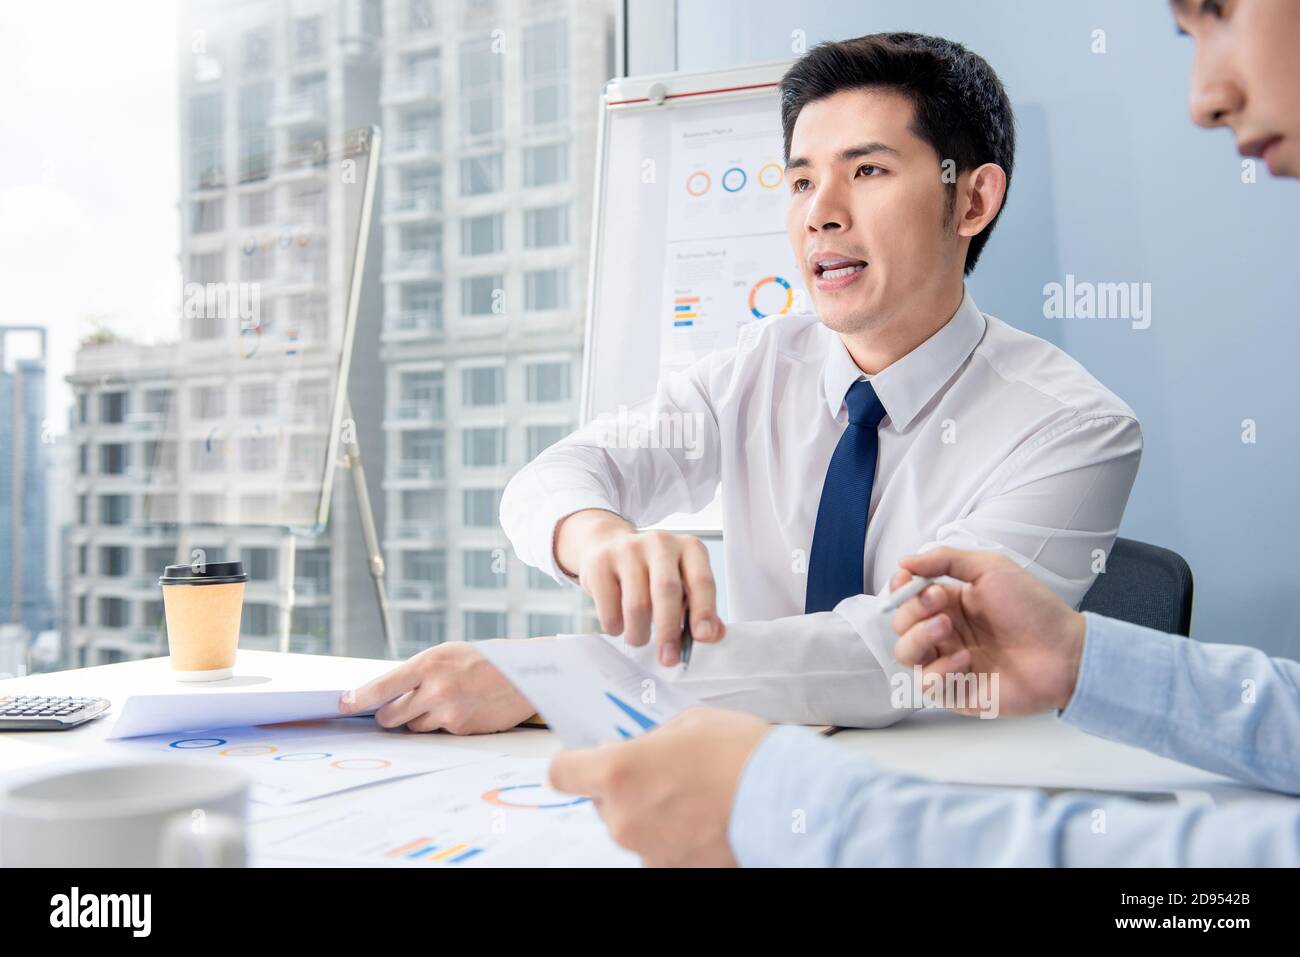 Portrait of Asian businessman analyzing data in an office meeting with colleague in urban setting Stock Photo